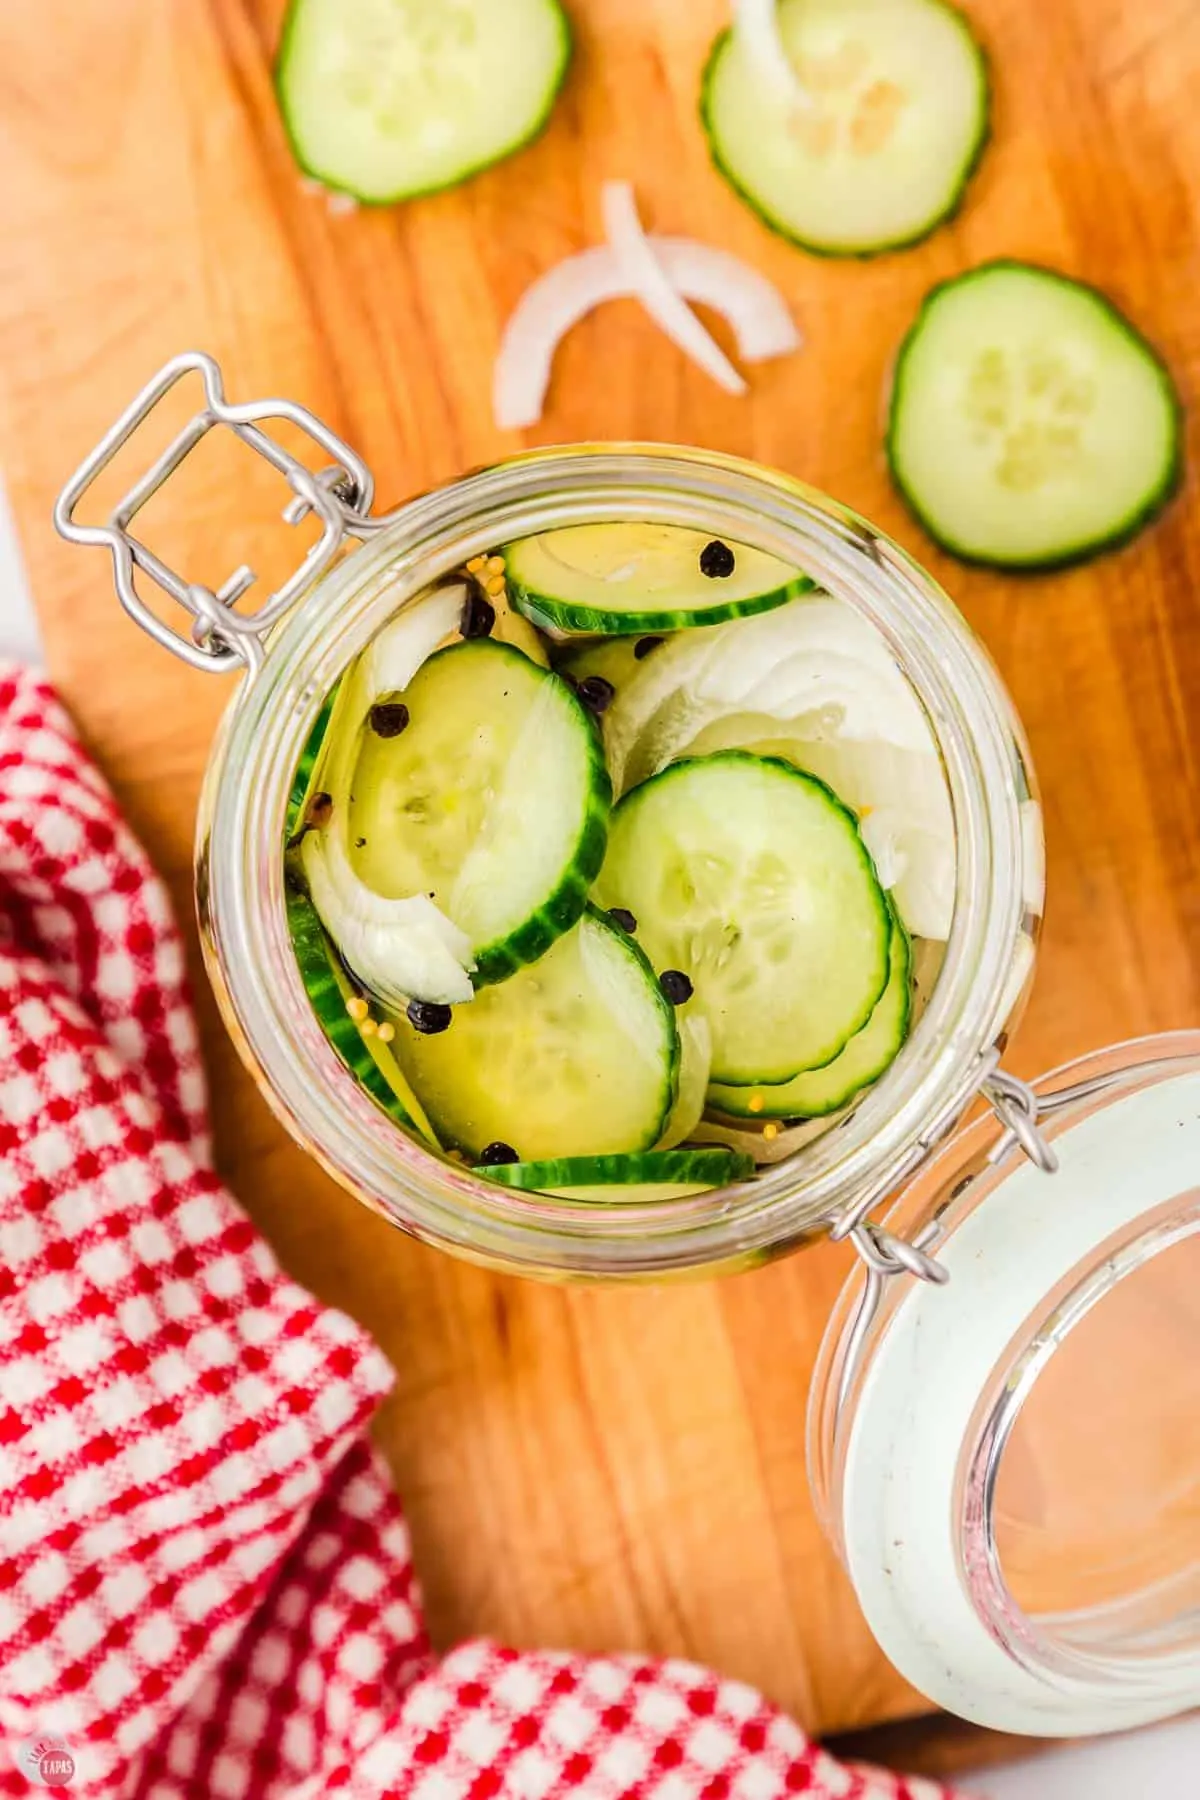 the best pickles are fresh made and stored in the fridge to get really cold